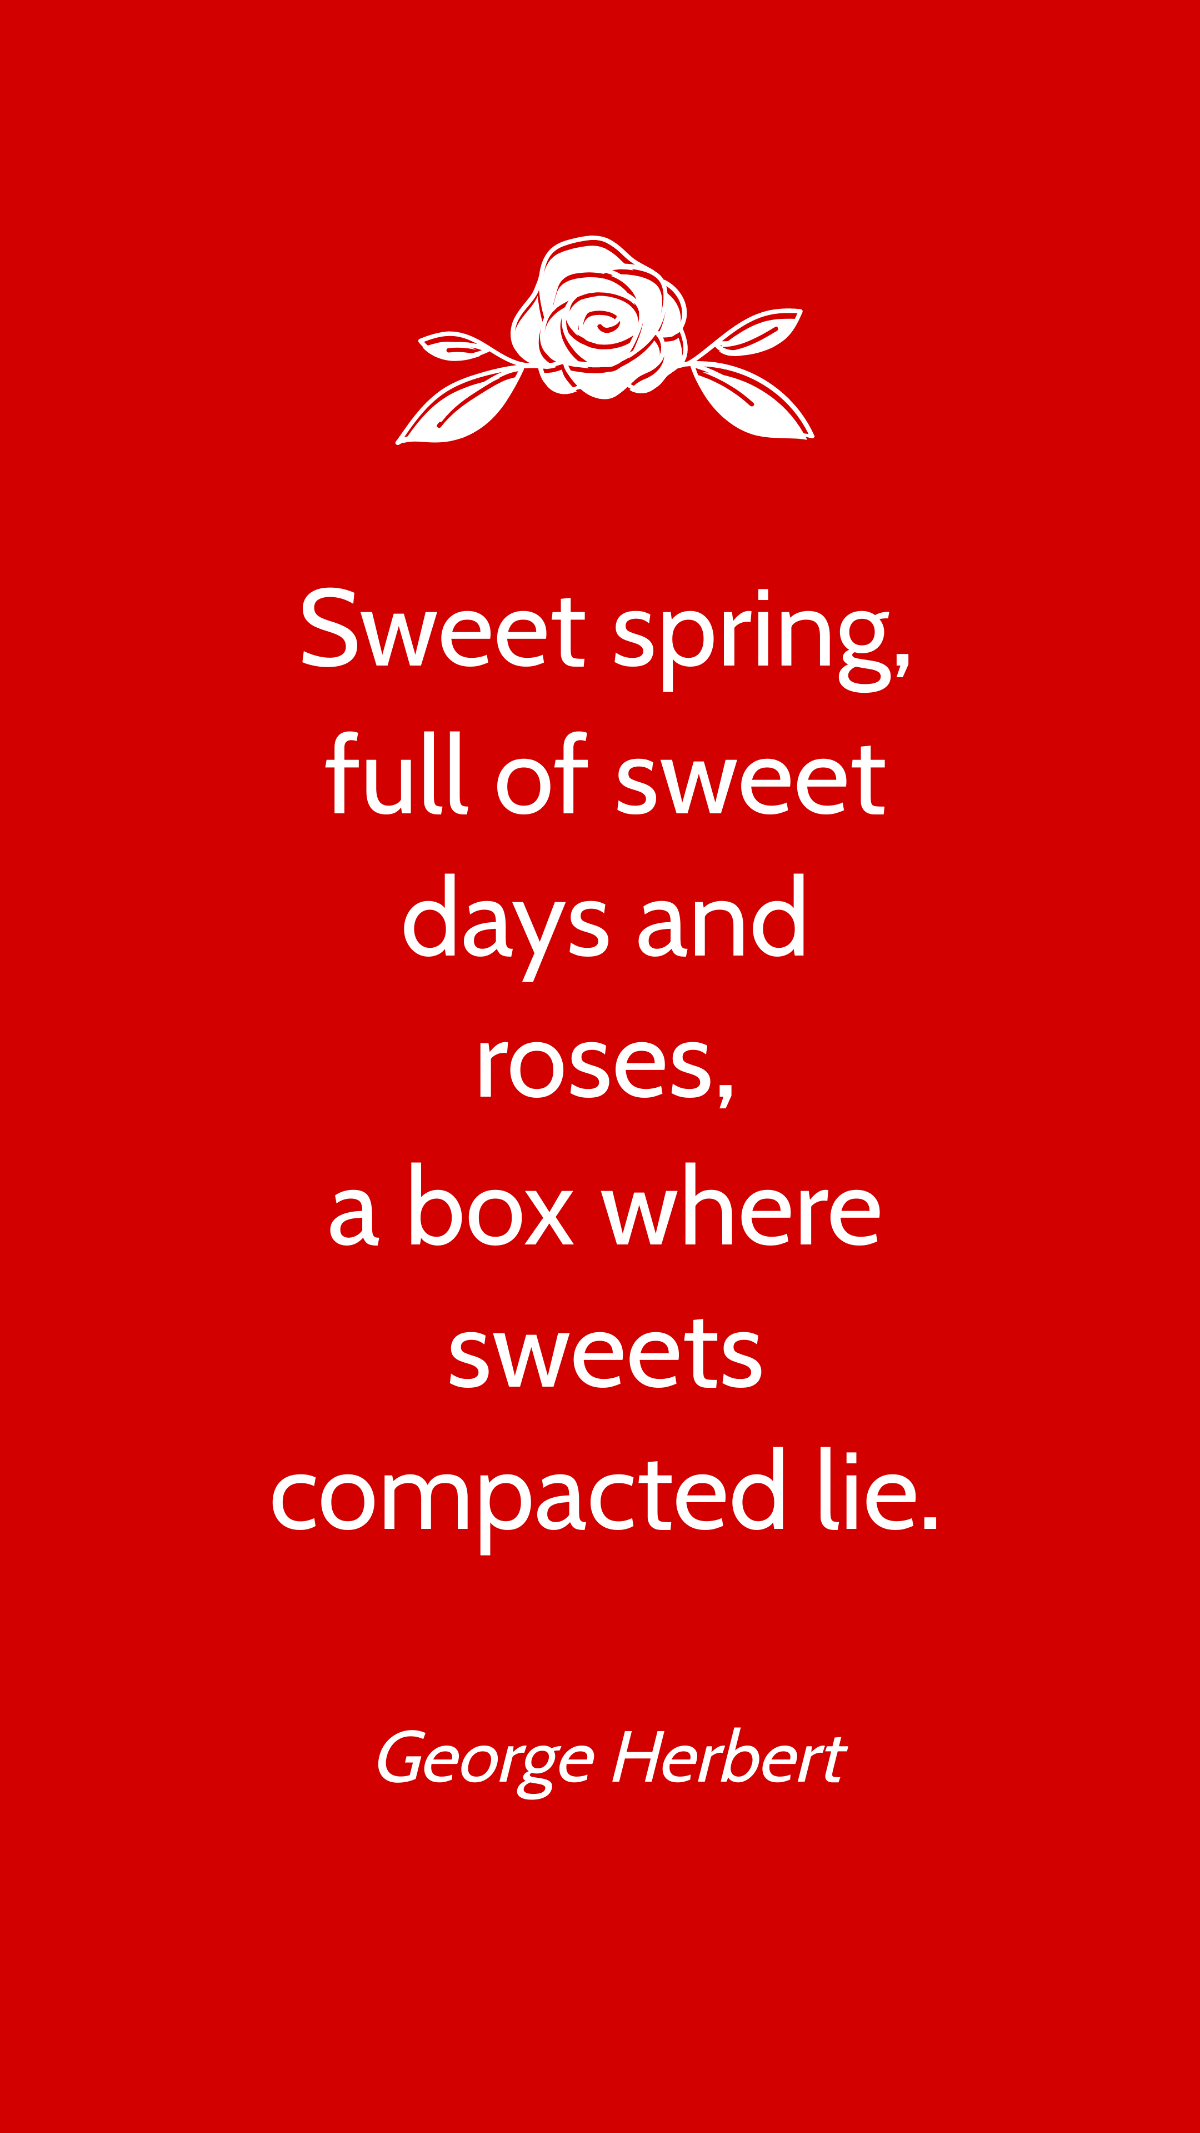 Free George Herbert - Sweet spring, full of sweet days and roses, a box where sweets compacted lie. Template